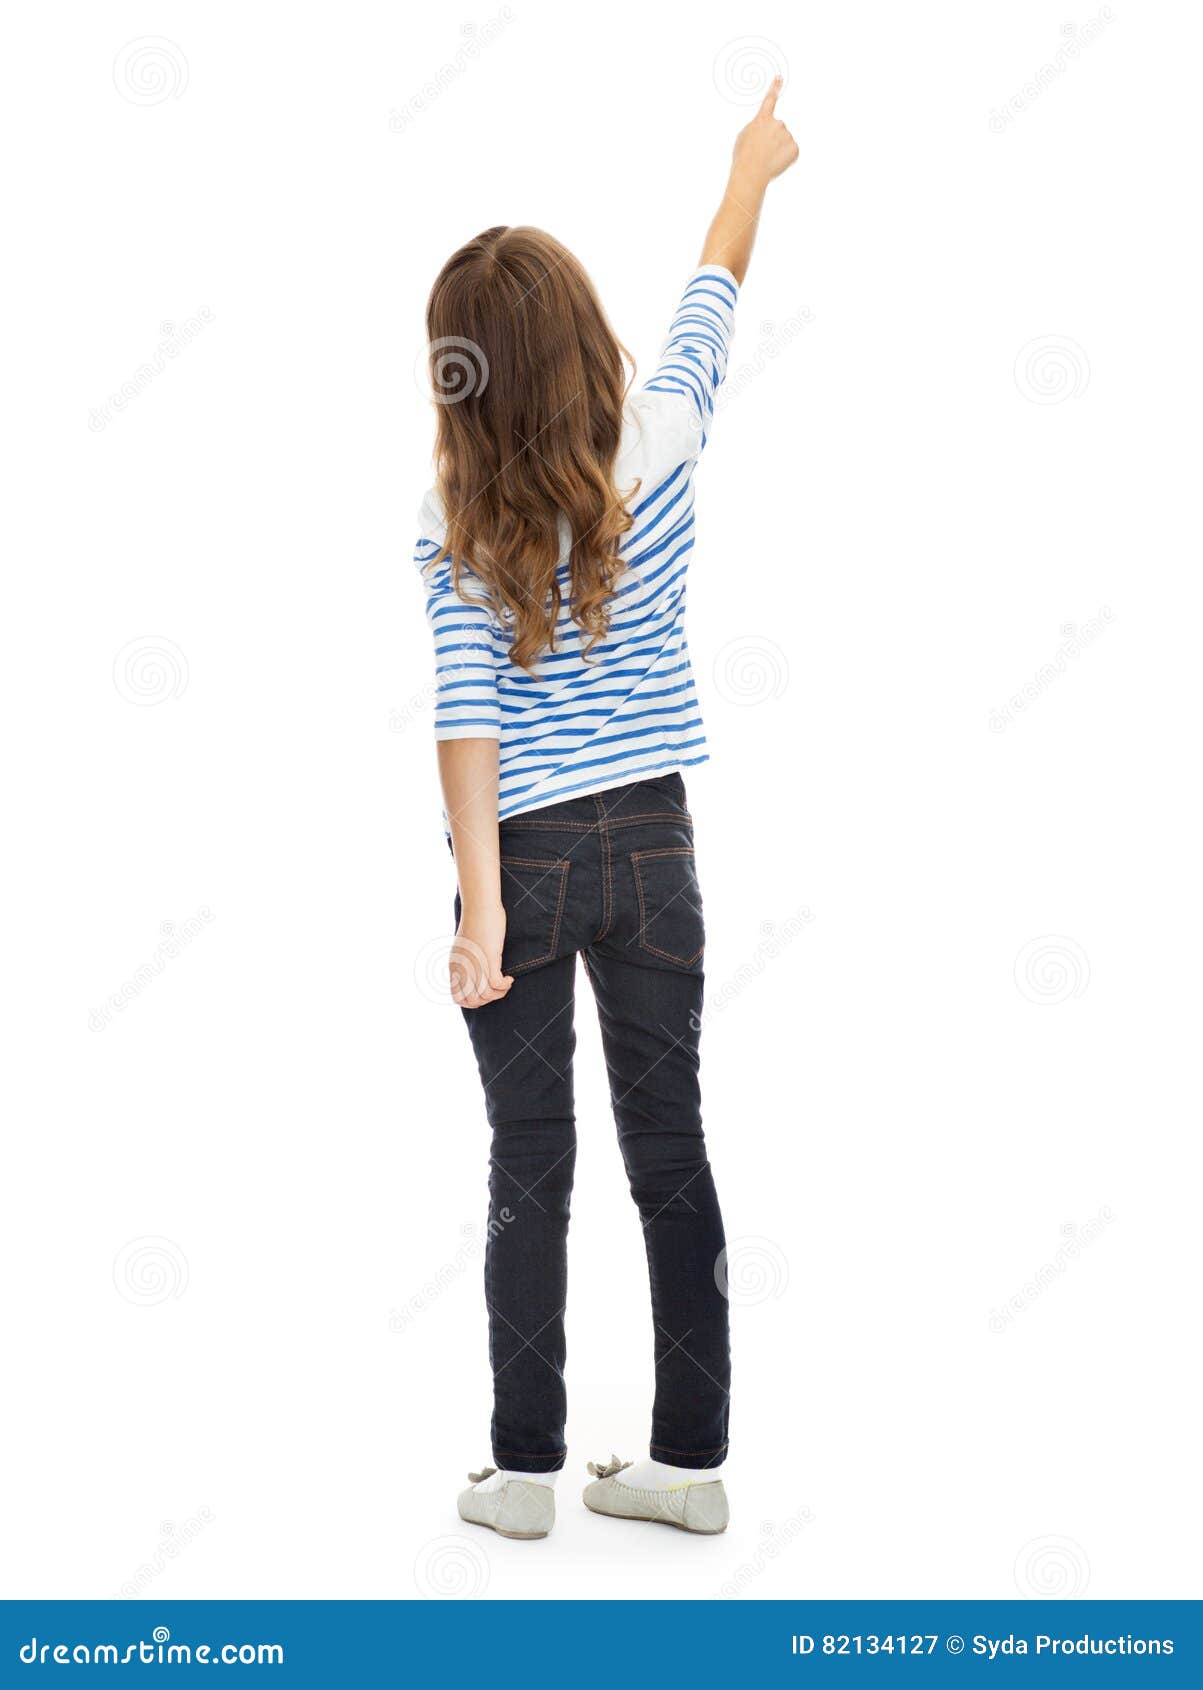 Girl Pointing Finger at Something Invisible Stock Image - Image of ...